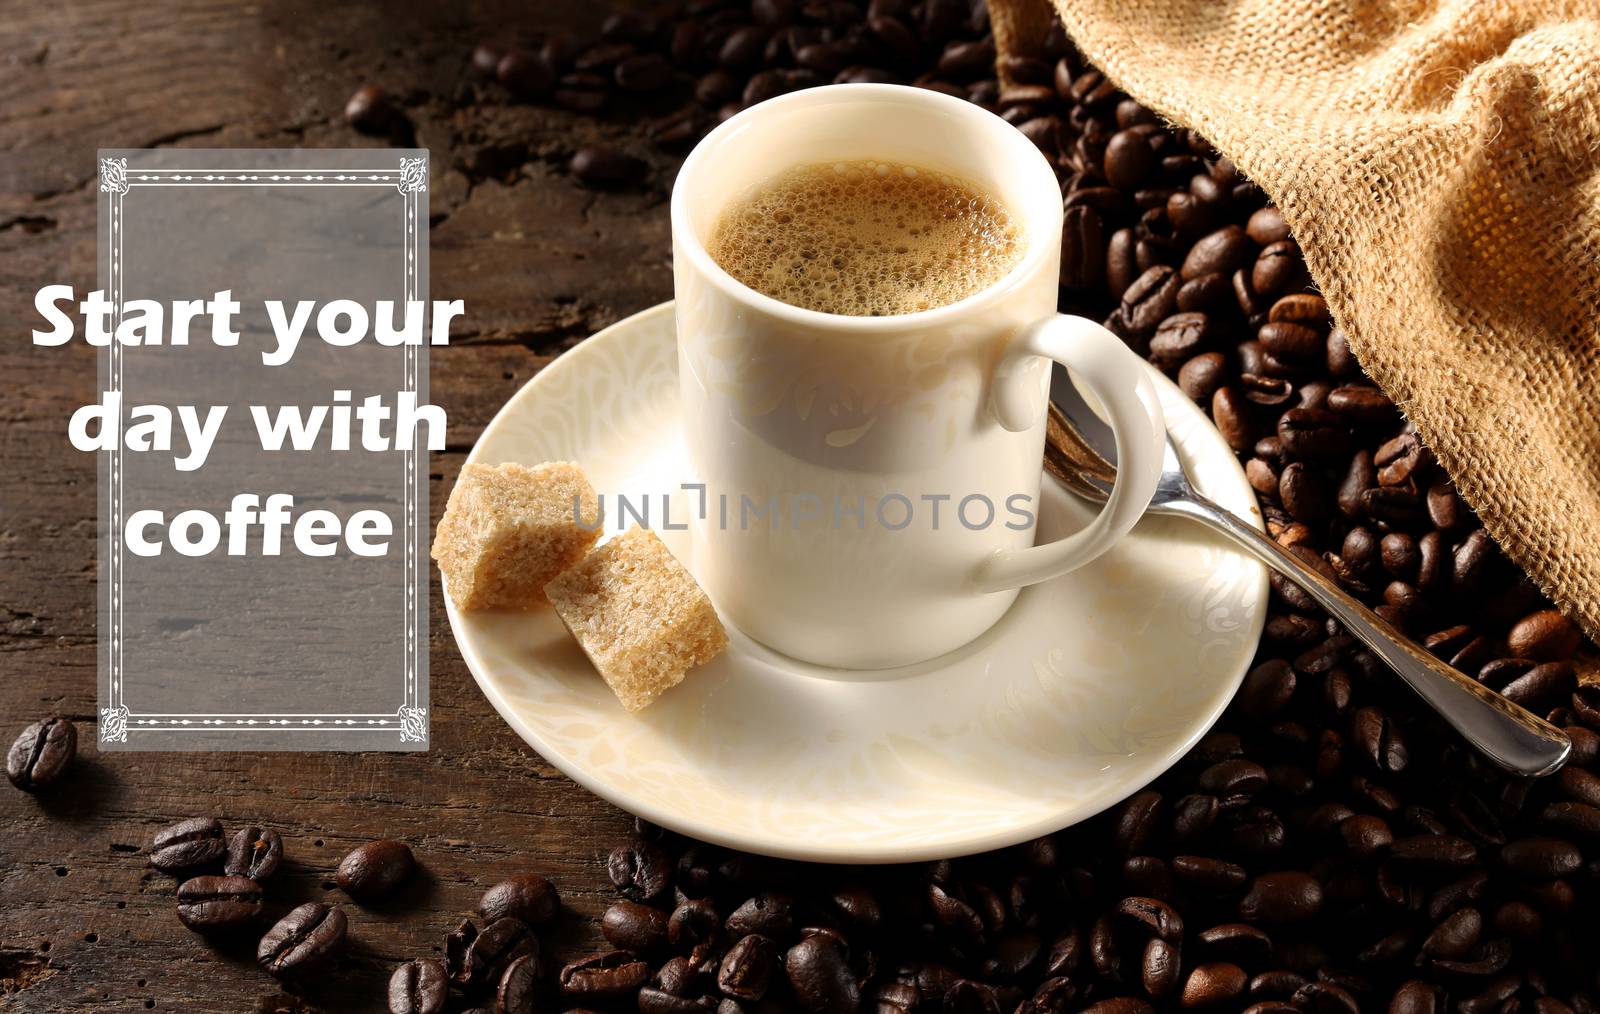 Inspiration life quote Start Your Day with Coffee, cup of coffee on old wood background with coffee beans on old wooden background. by NelliPolk